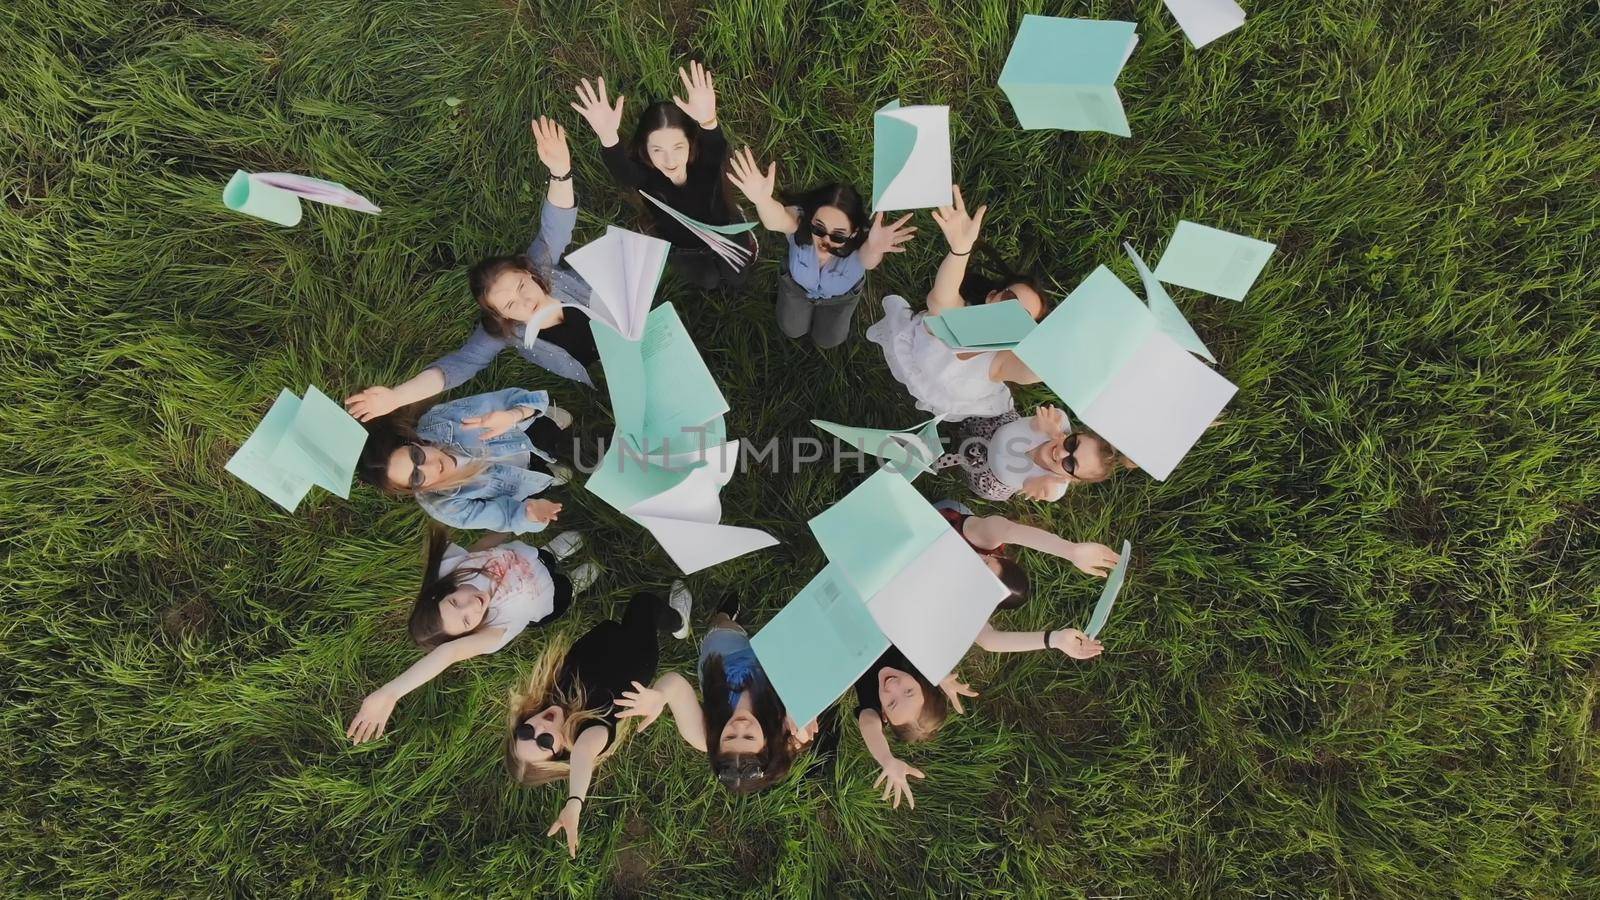 Students toss exercise books on their last day of school